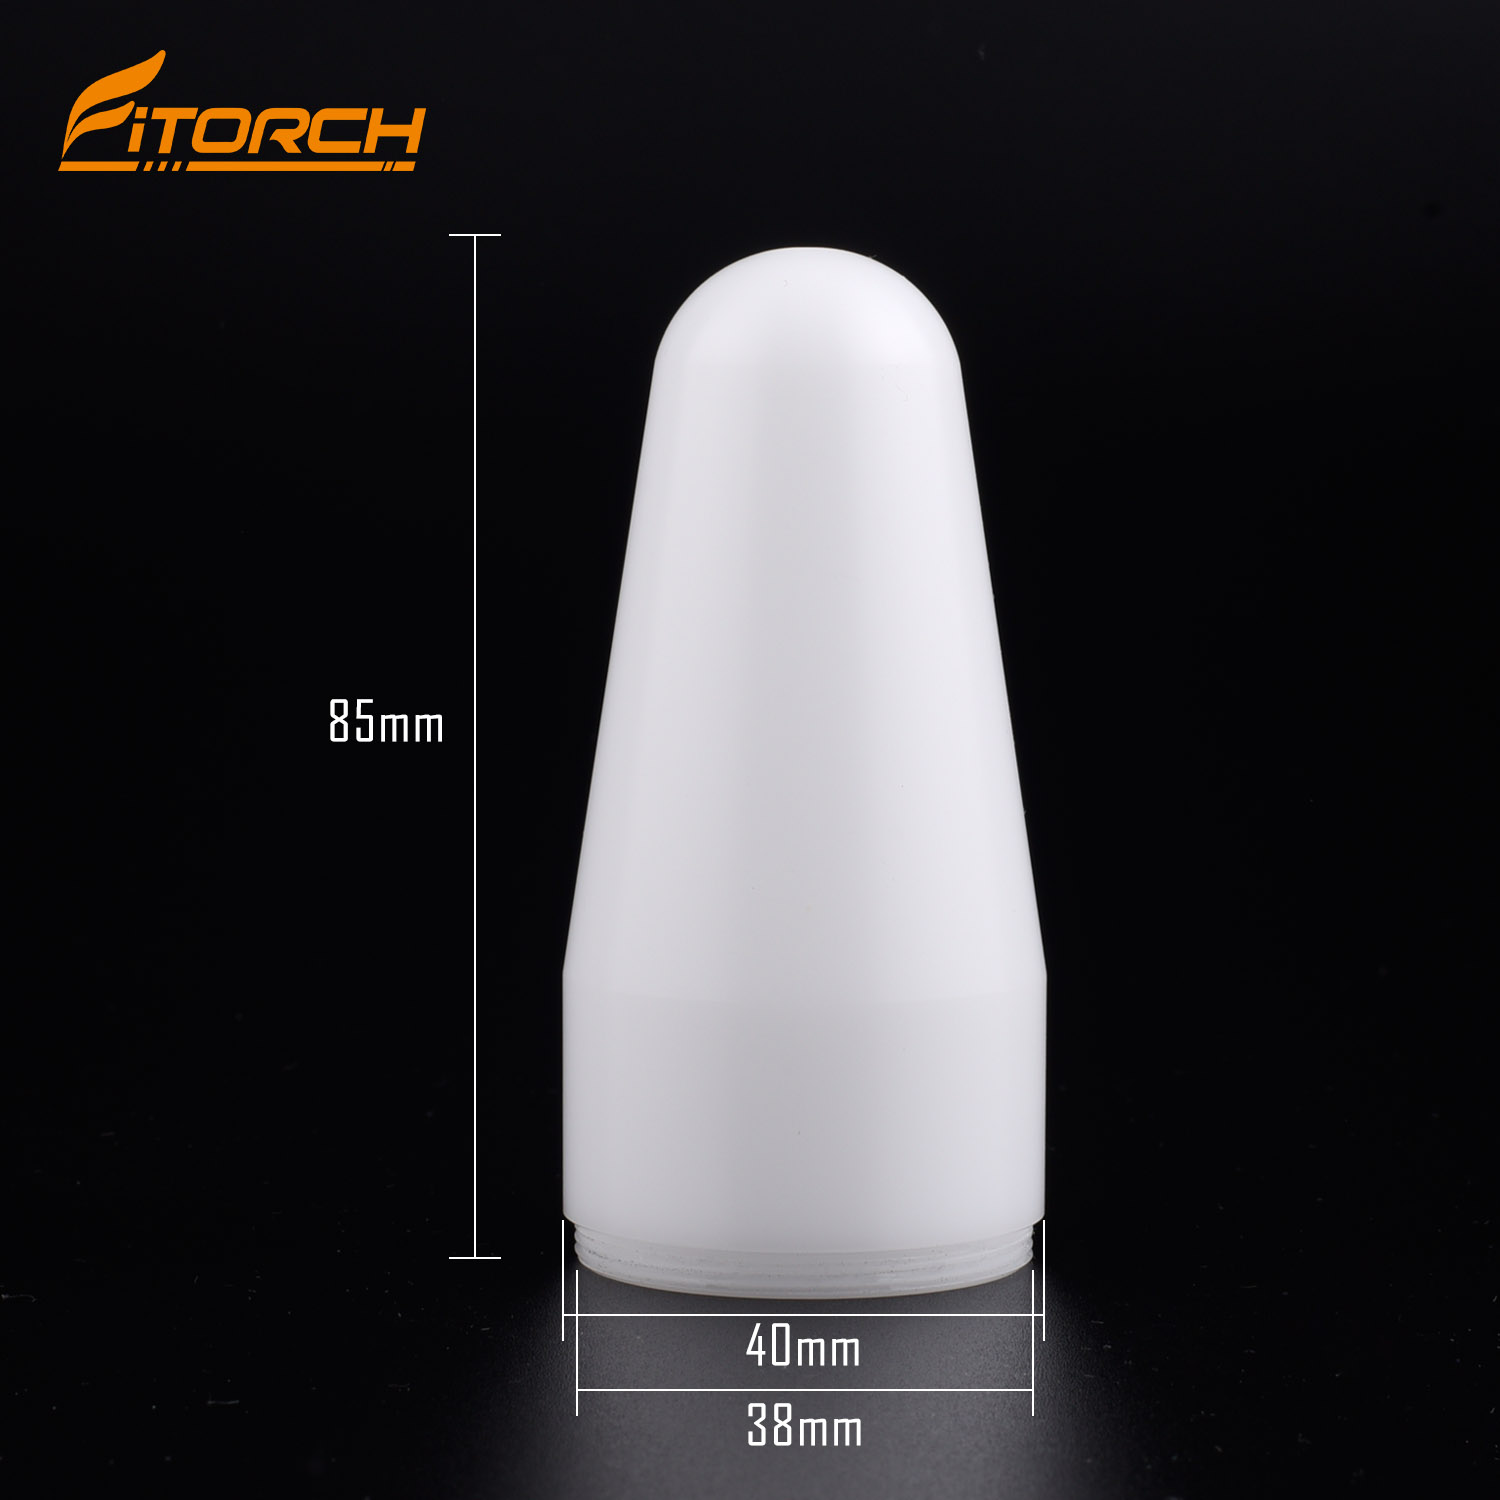 Fitorch-Flashlight-POM-White-Diffuser-Signal-Light-Traffic-Wand-for-Fitorch-MR35-1233701-3